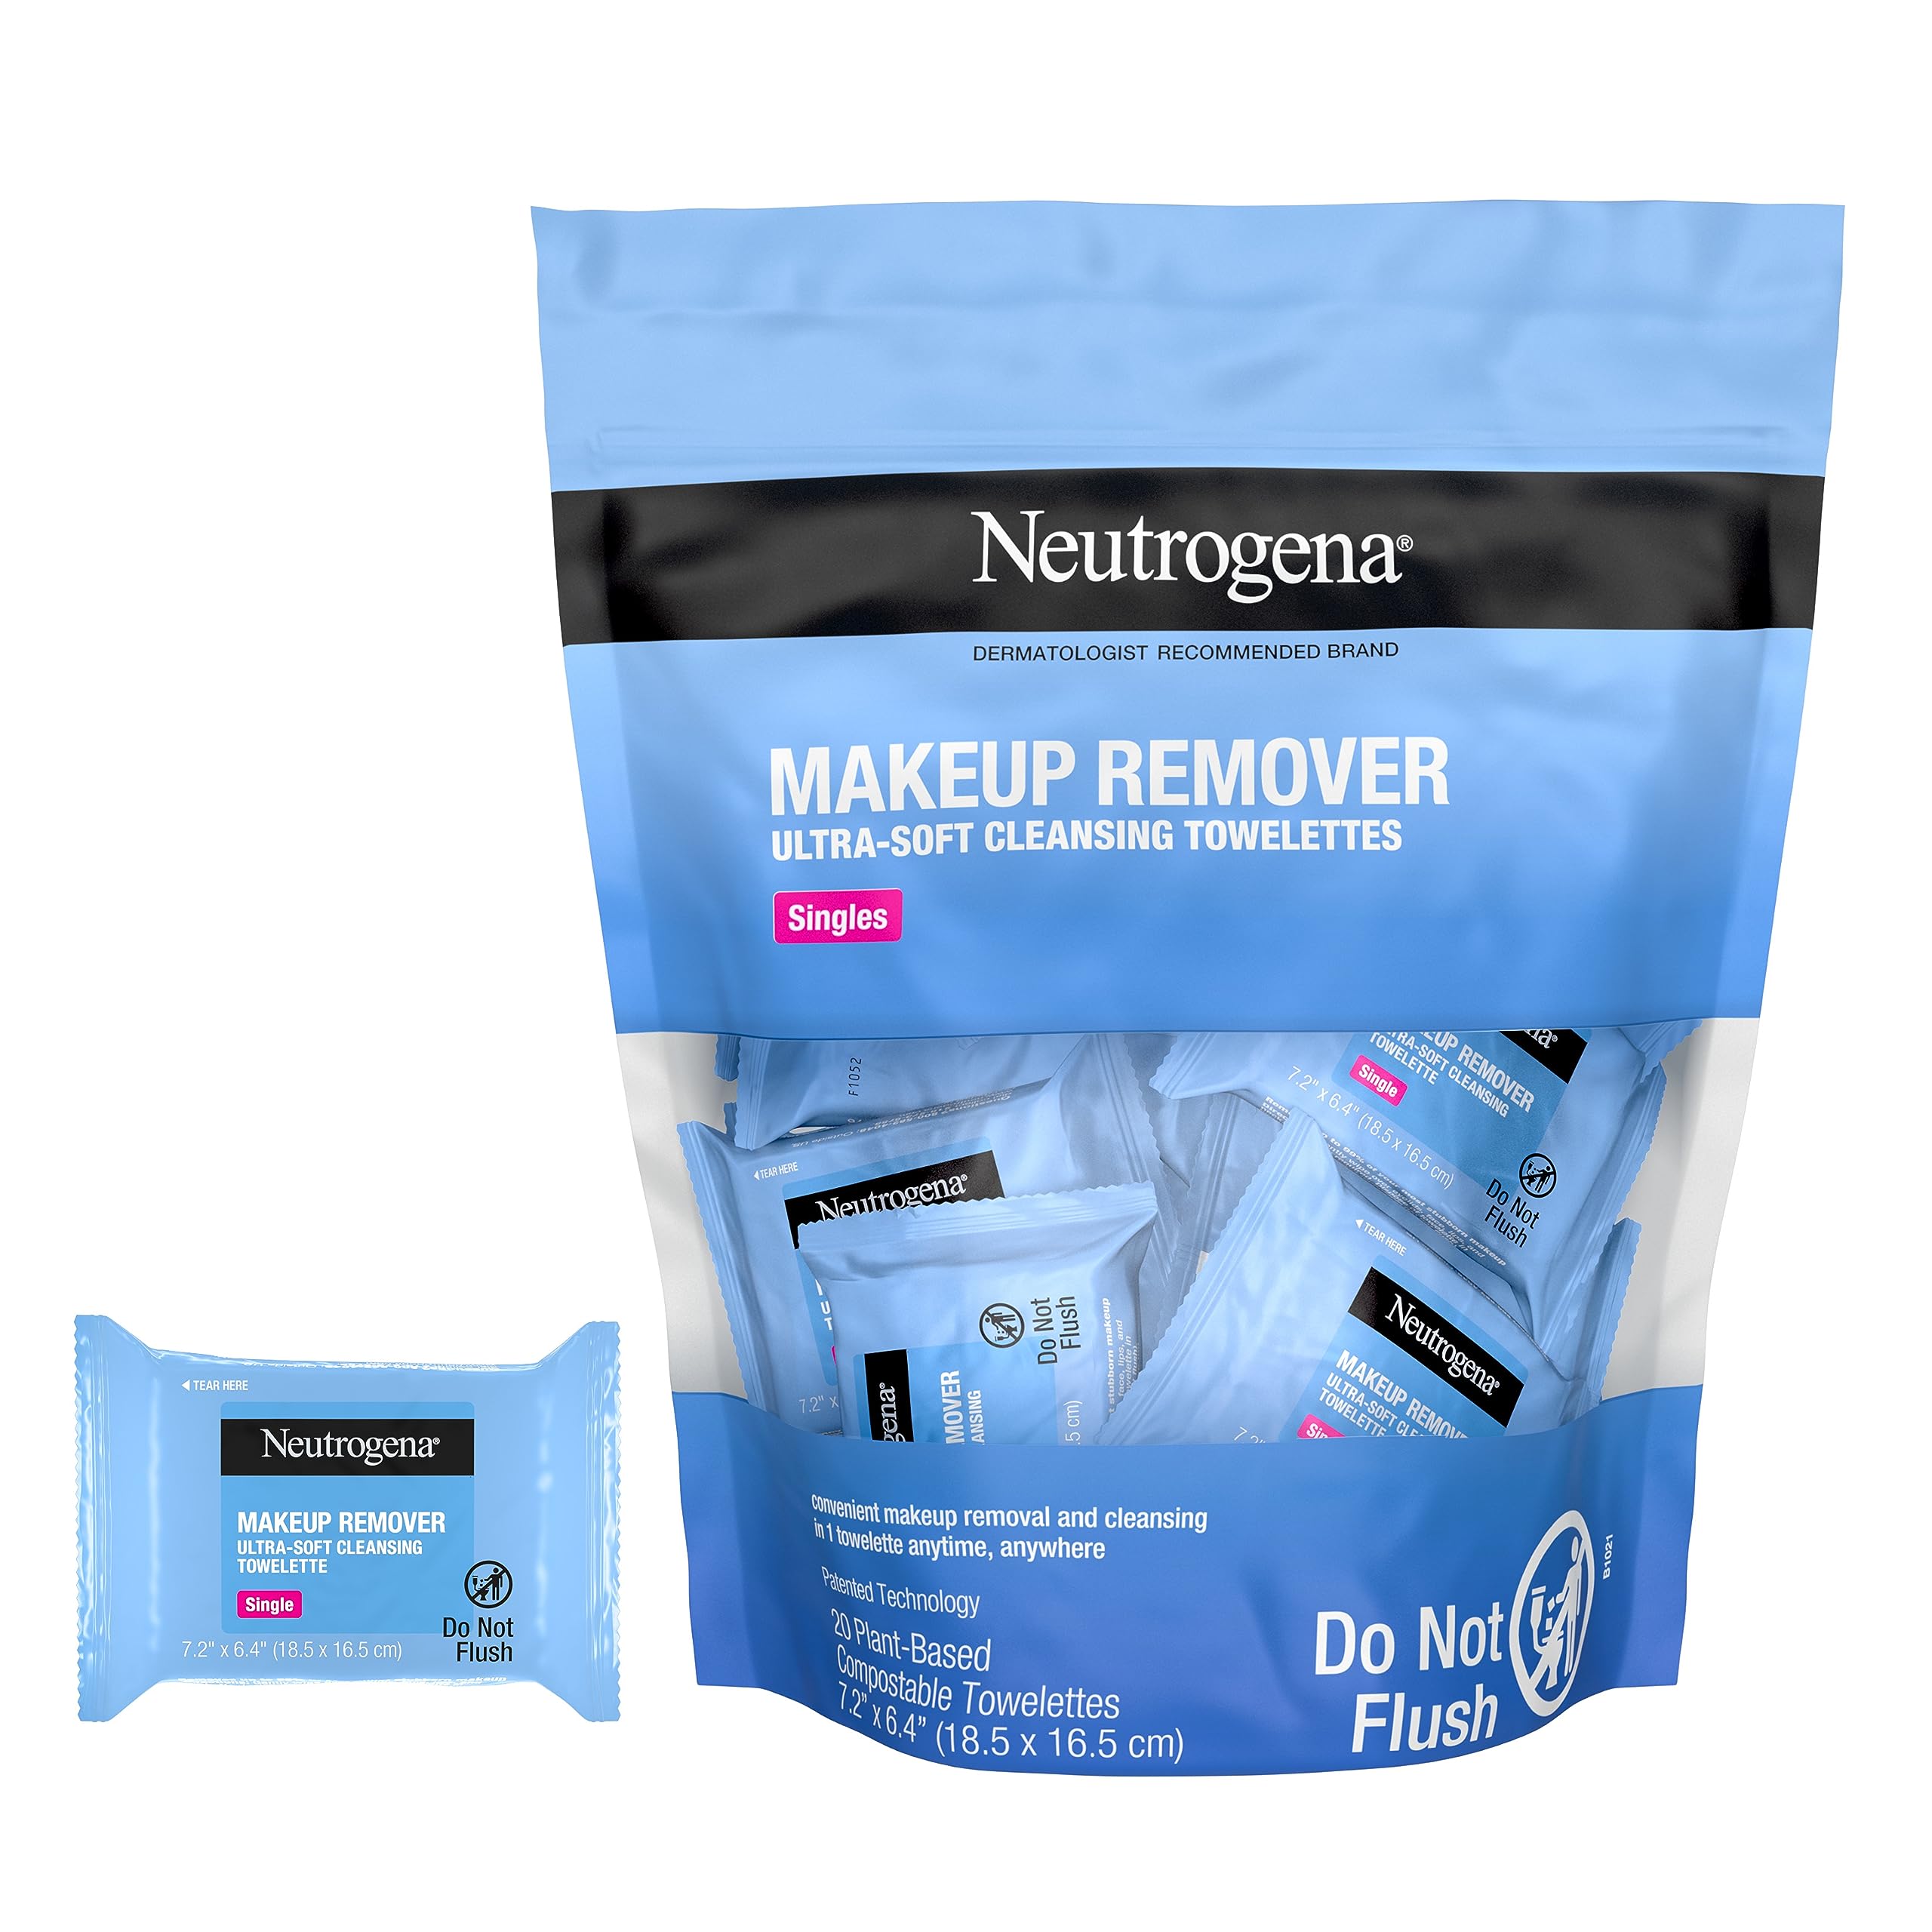 Neutrogena Makeup Remover Wipes Singles, Daily Facial Cleanser Towelettes, Gently Removes Oil & Makeup, Alcohol-Free Makeup Wipes, Individually Wrapped, 20 ct